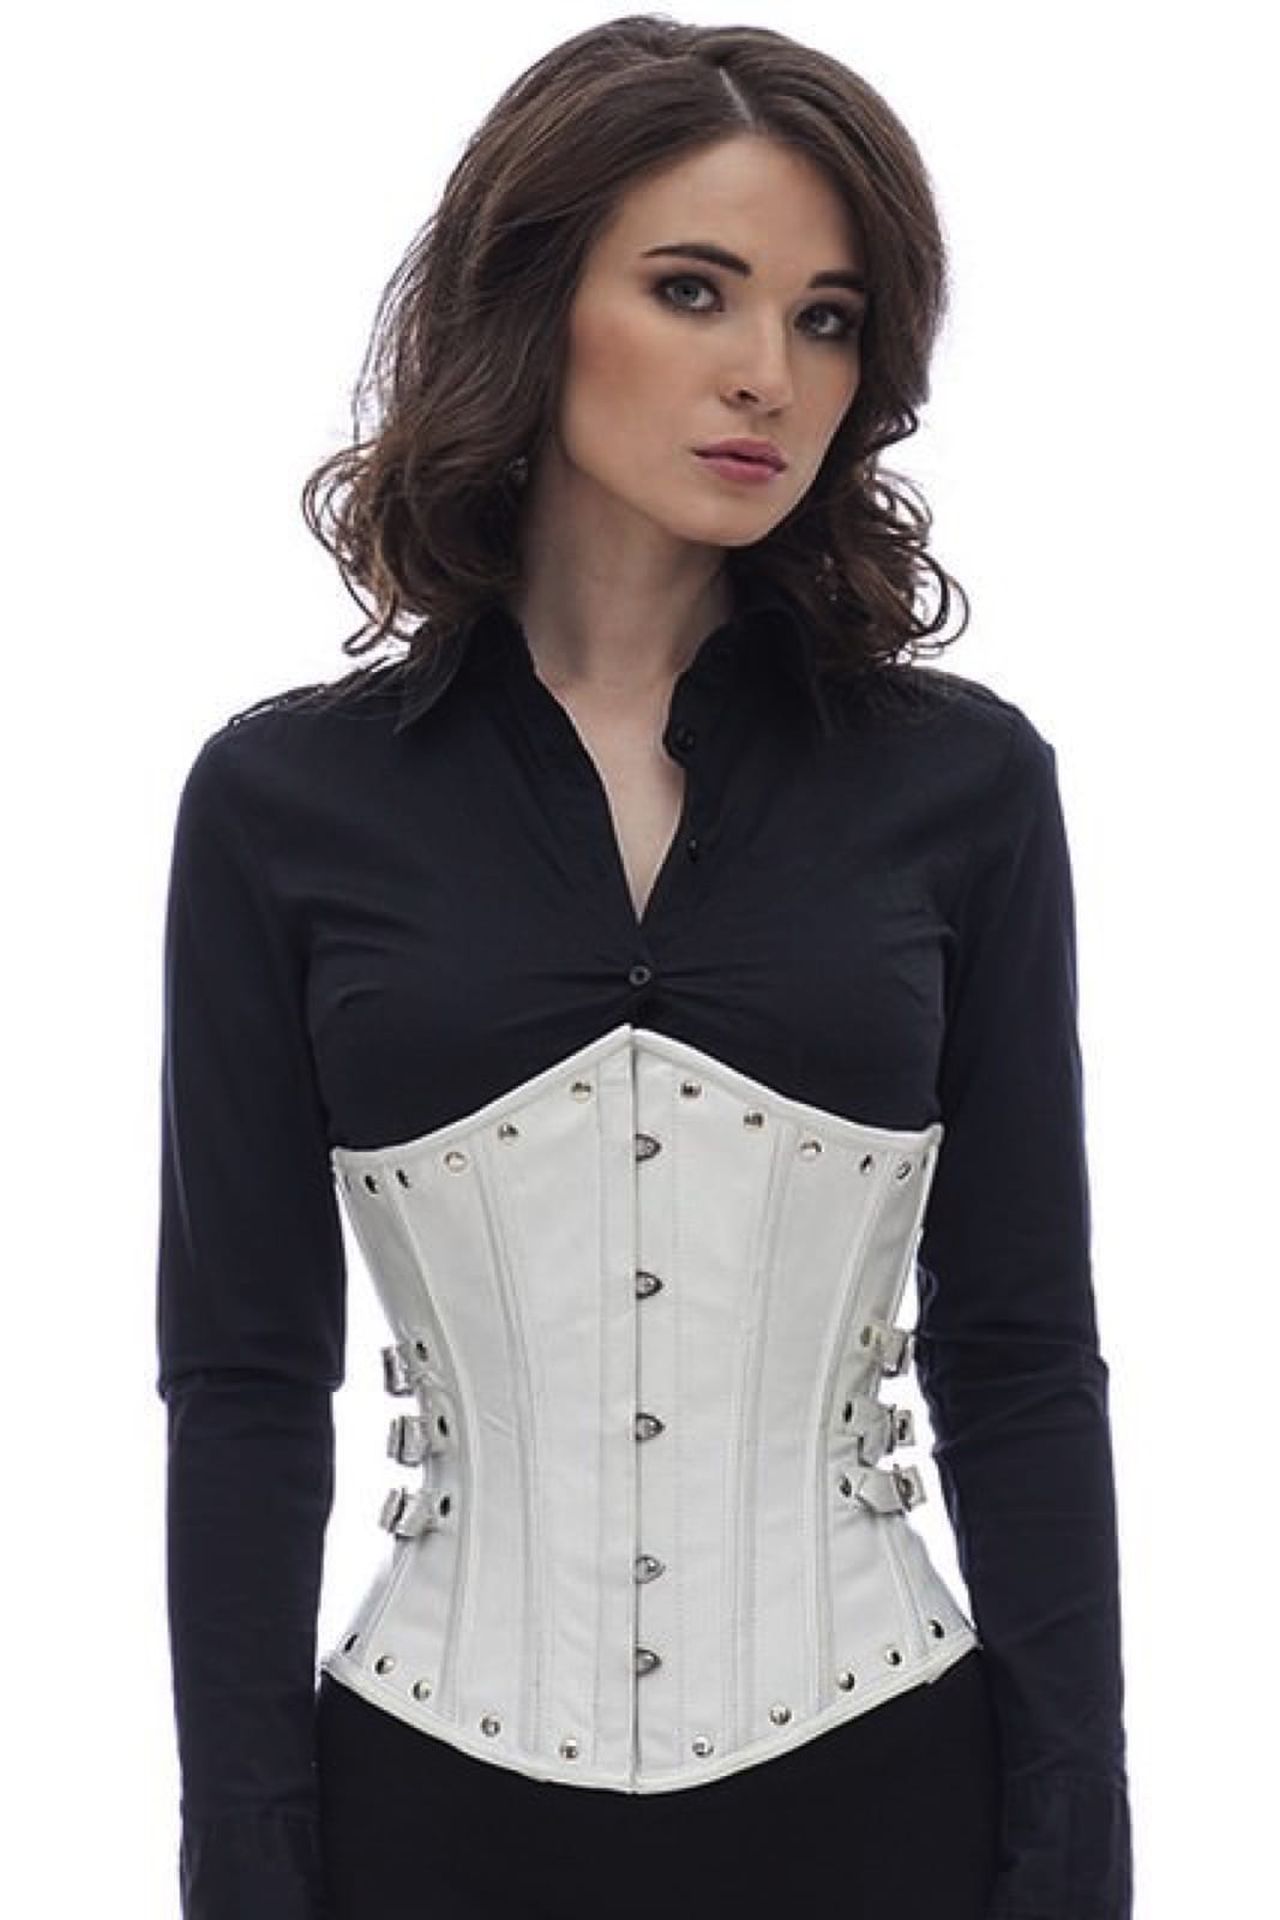 Corset white leather underbust with rivets and side buckles lg21